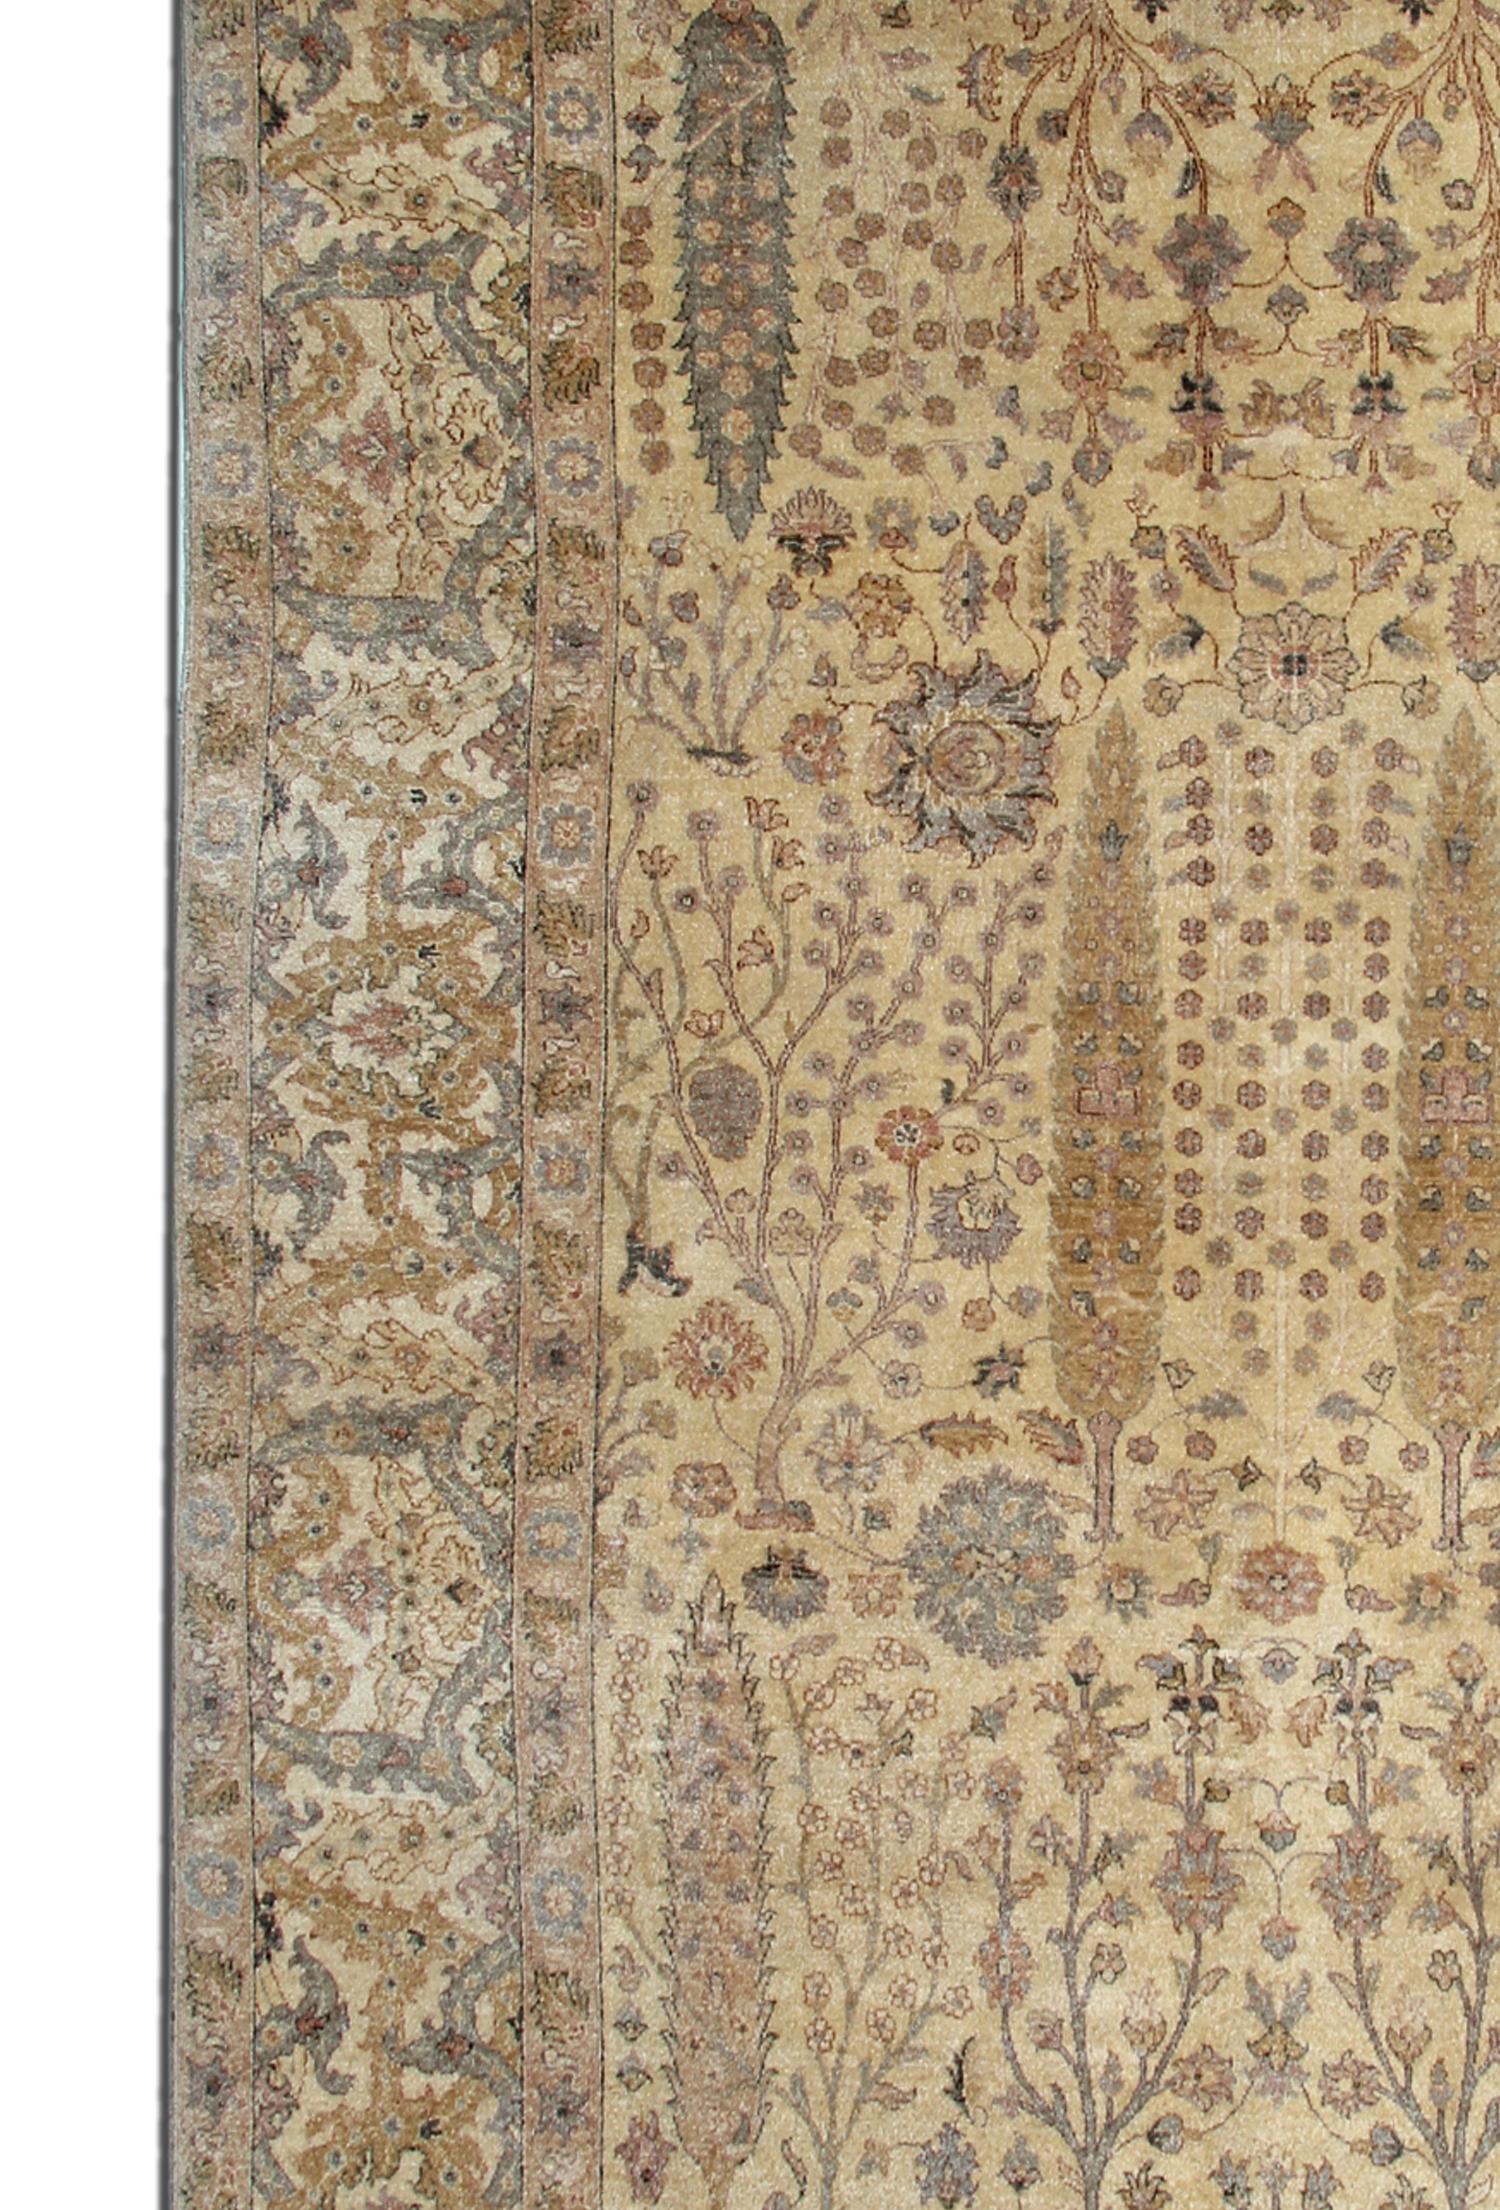 This rug is a Ziegler Style Sultanabad rug made on our looms by our master weavers in Afghanistan. It is handmade with all-natural veg dyes all hand-spun wool. The large-scale design makes Sultanabad regarded as the most appealing to European and